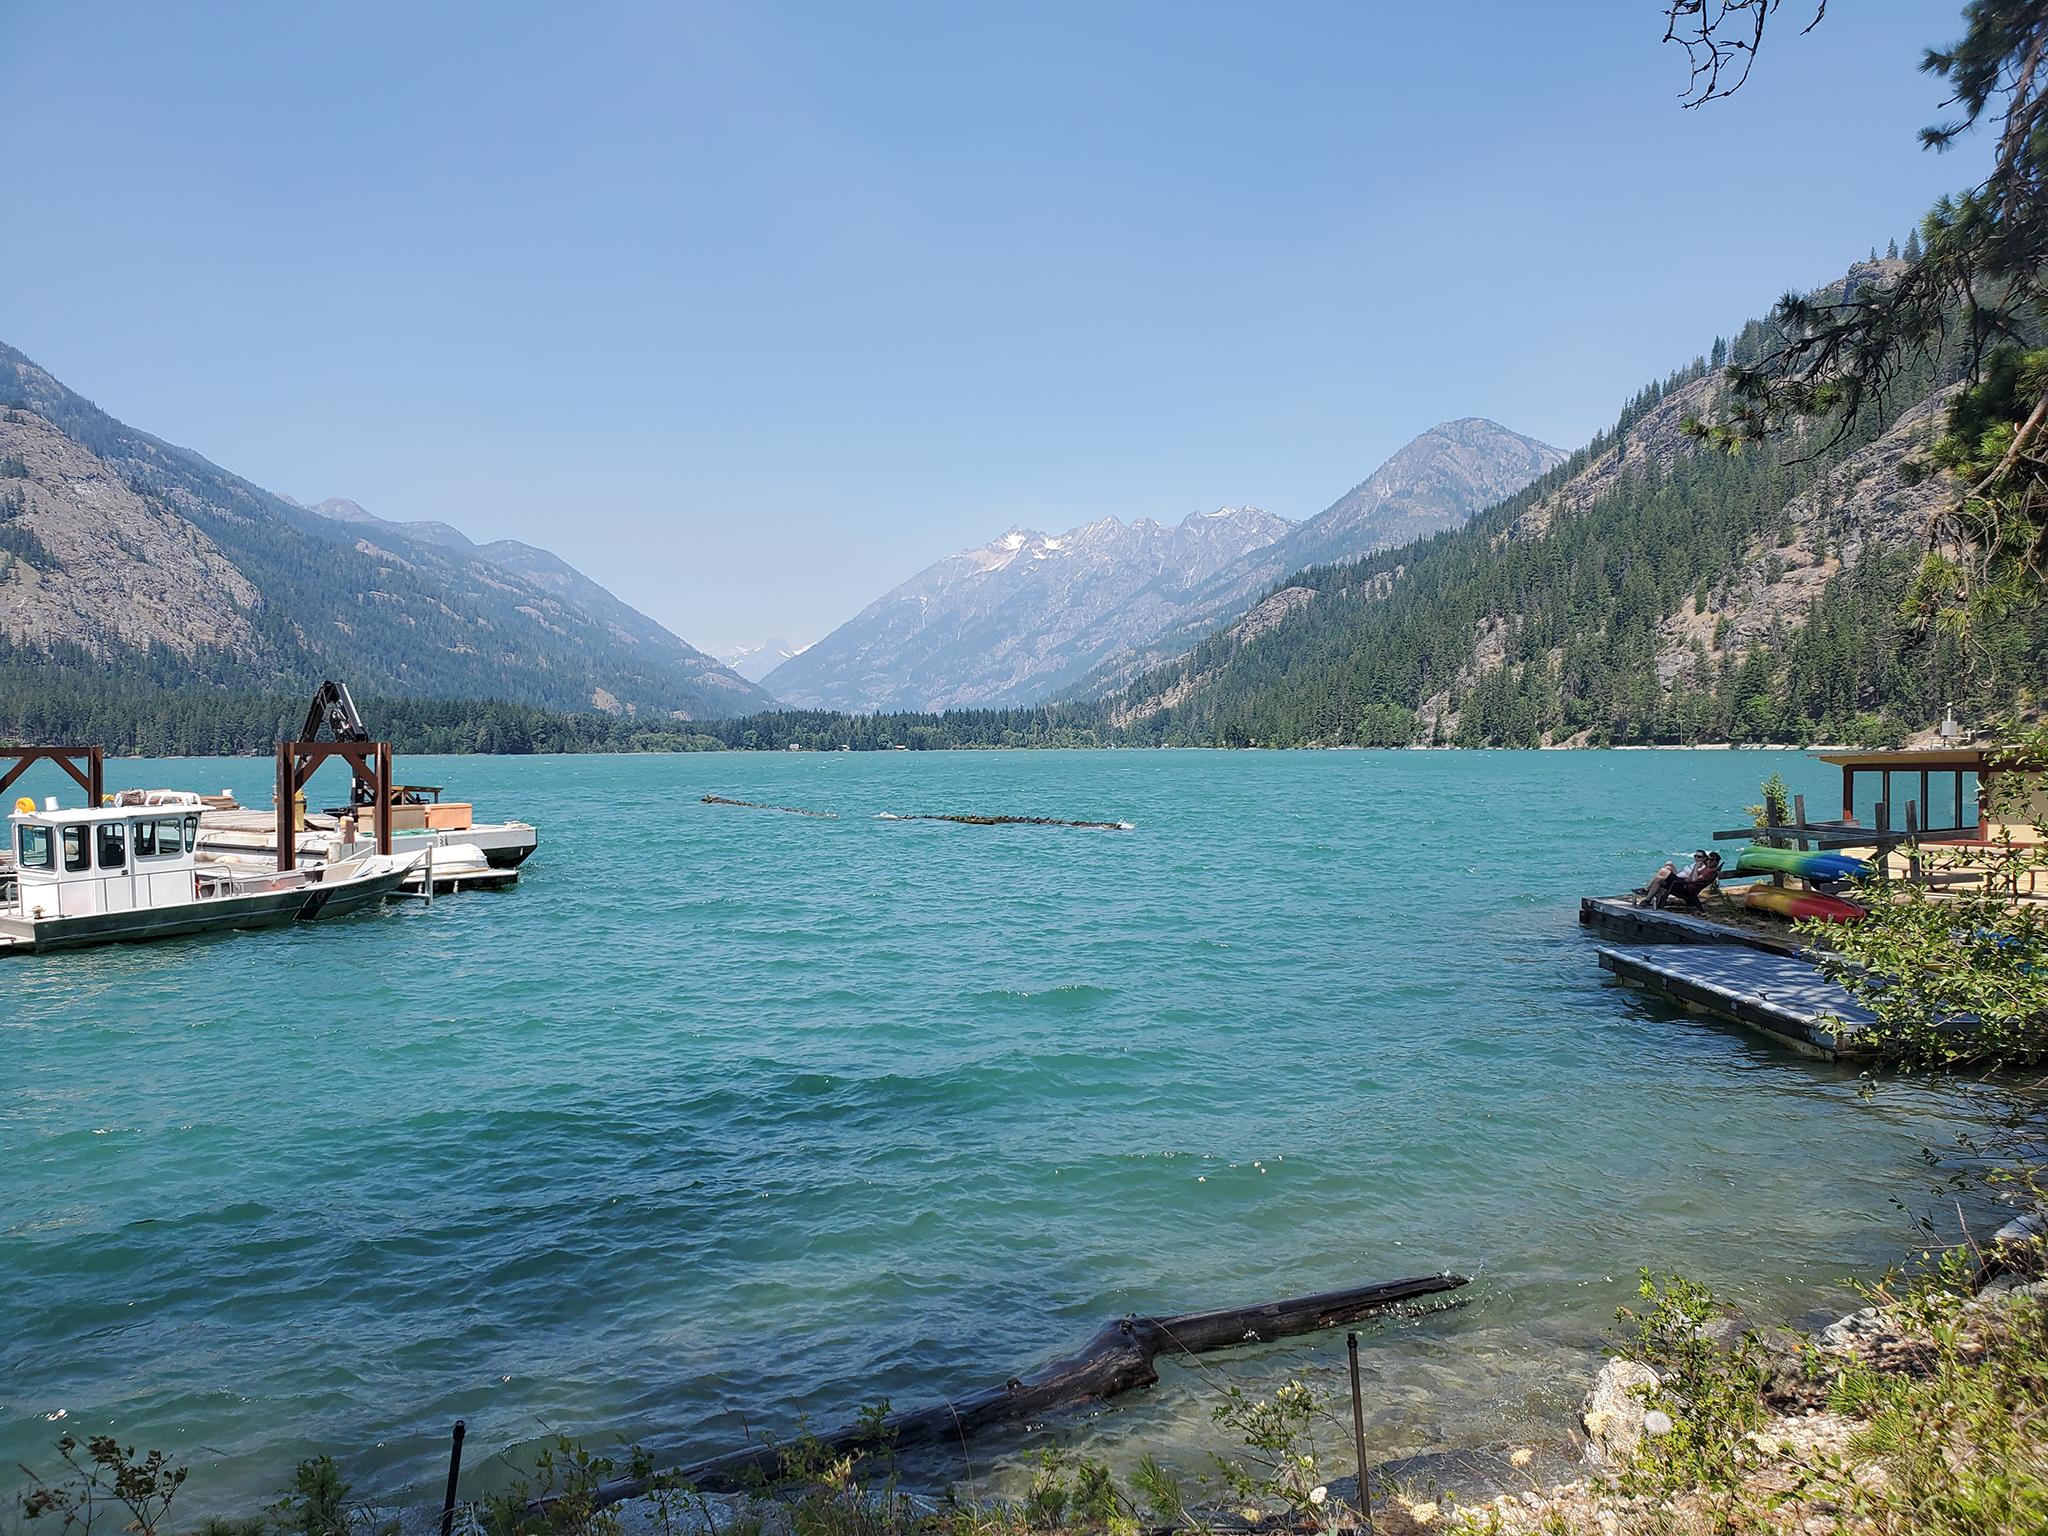 Two ferry companies operate out of Chelan to provide daily services to Stehekin.